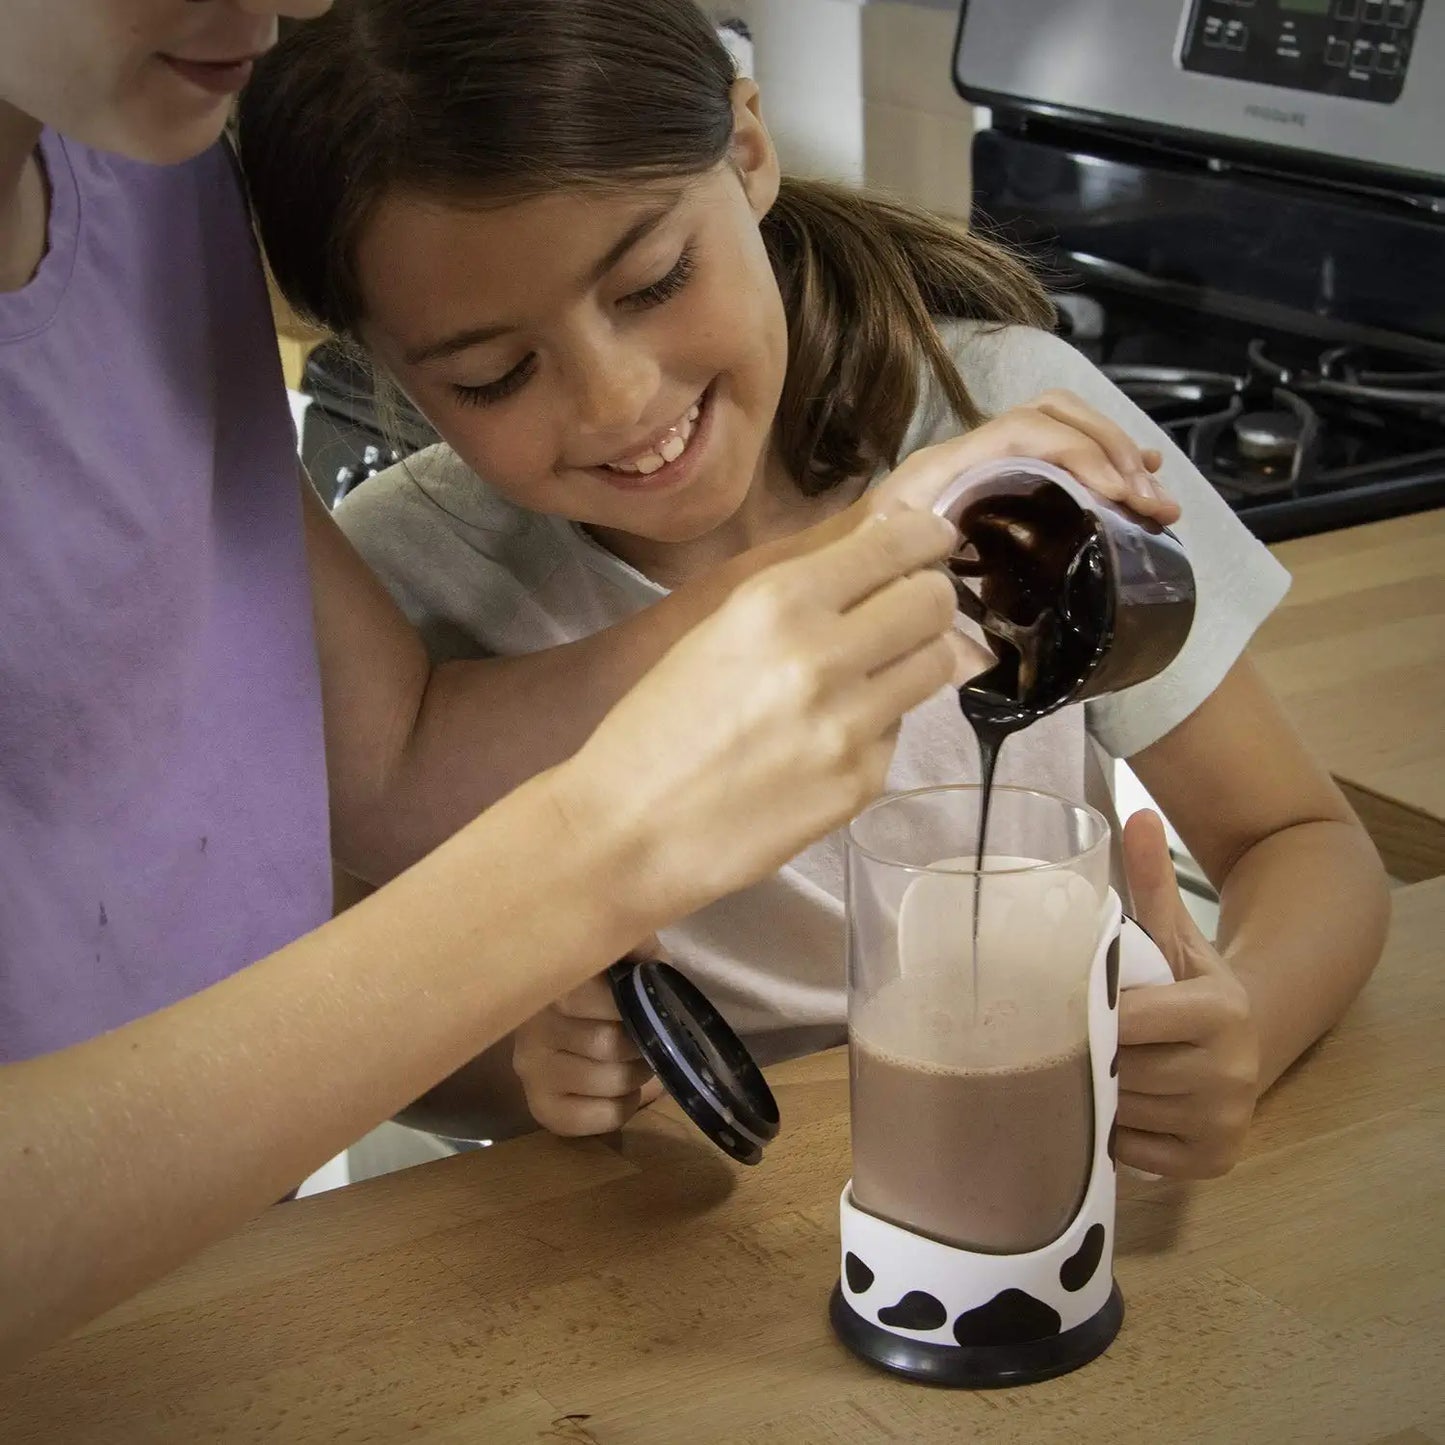 A parent and child pouring chocolate syrup into a chocolate milk automatic mixing cup